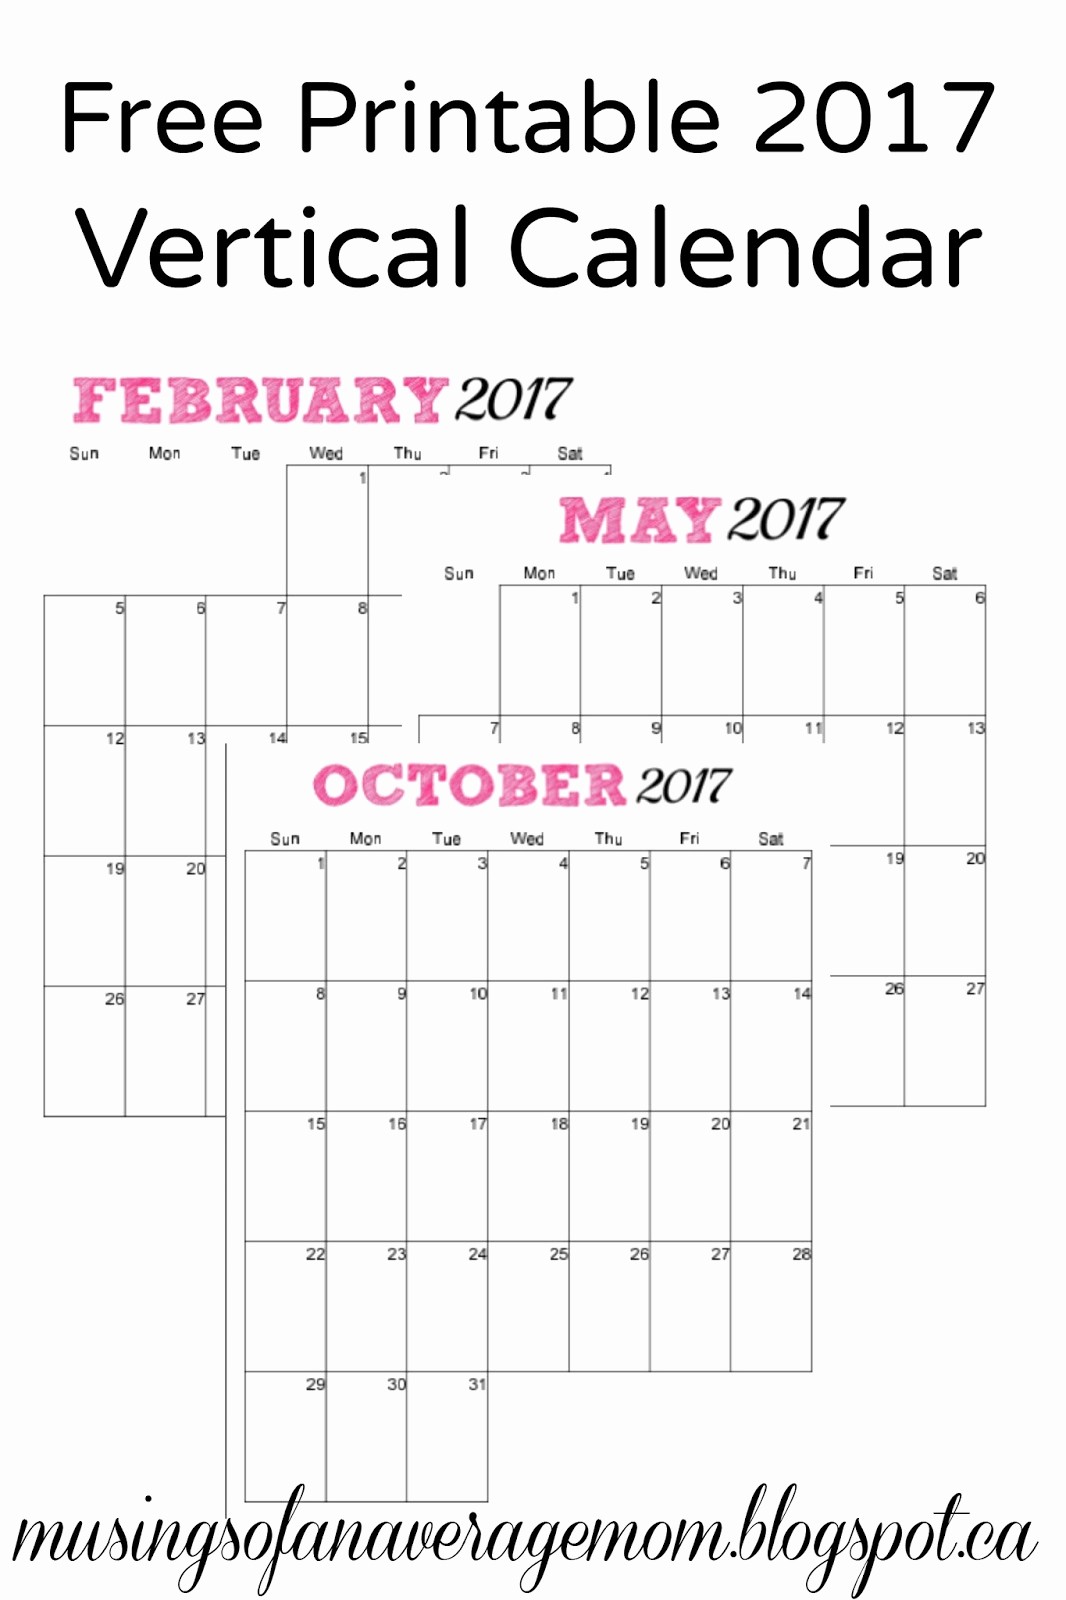 Free Printable Quarterly Calendar 2017 Awesome Musings Of An Average Mom Free 2017 Vertical Monthly Calendar